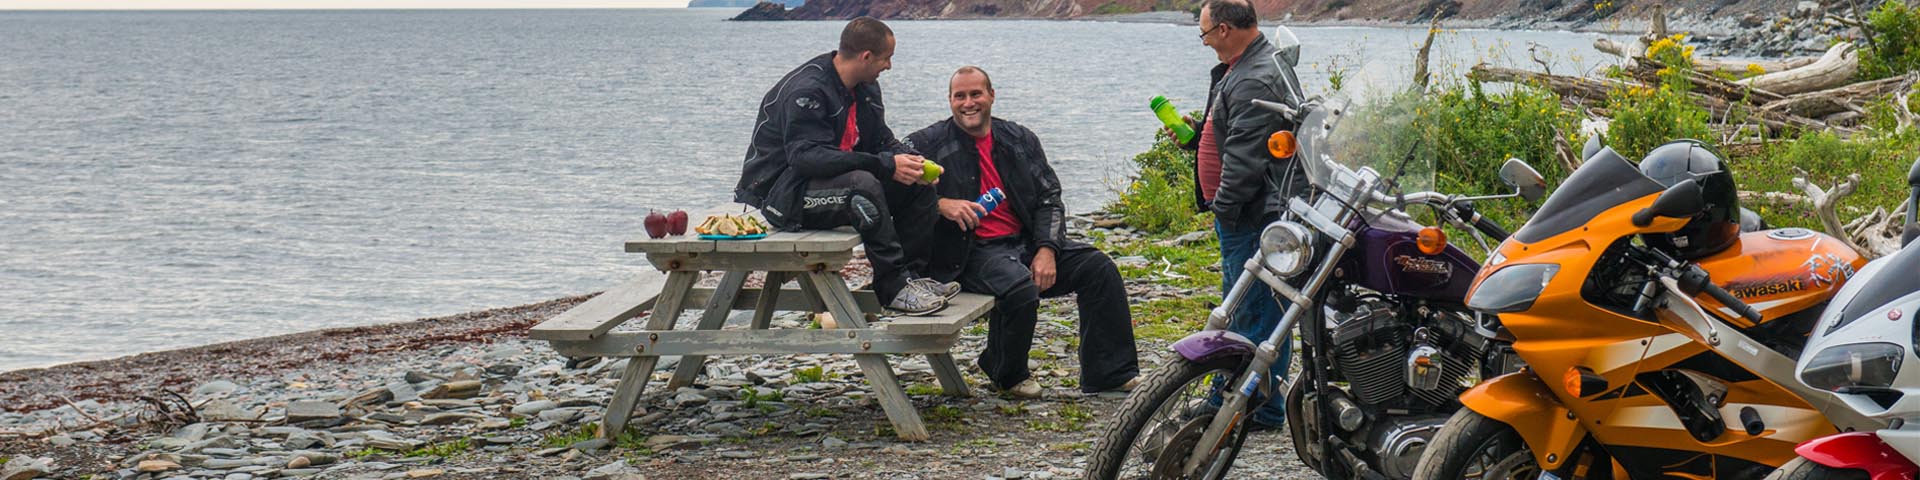 Motorcyclists taking a break at La Bloc day use area, Cape Breton Highlands National Park.